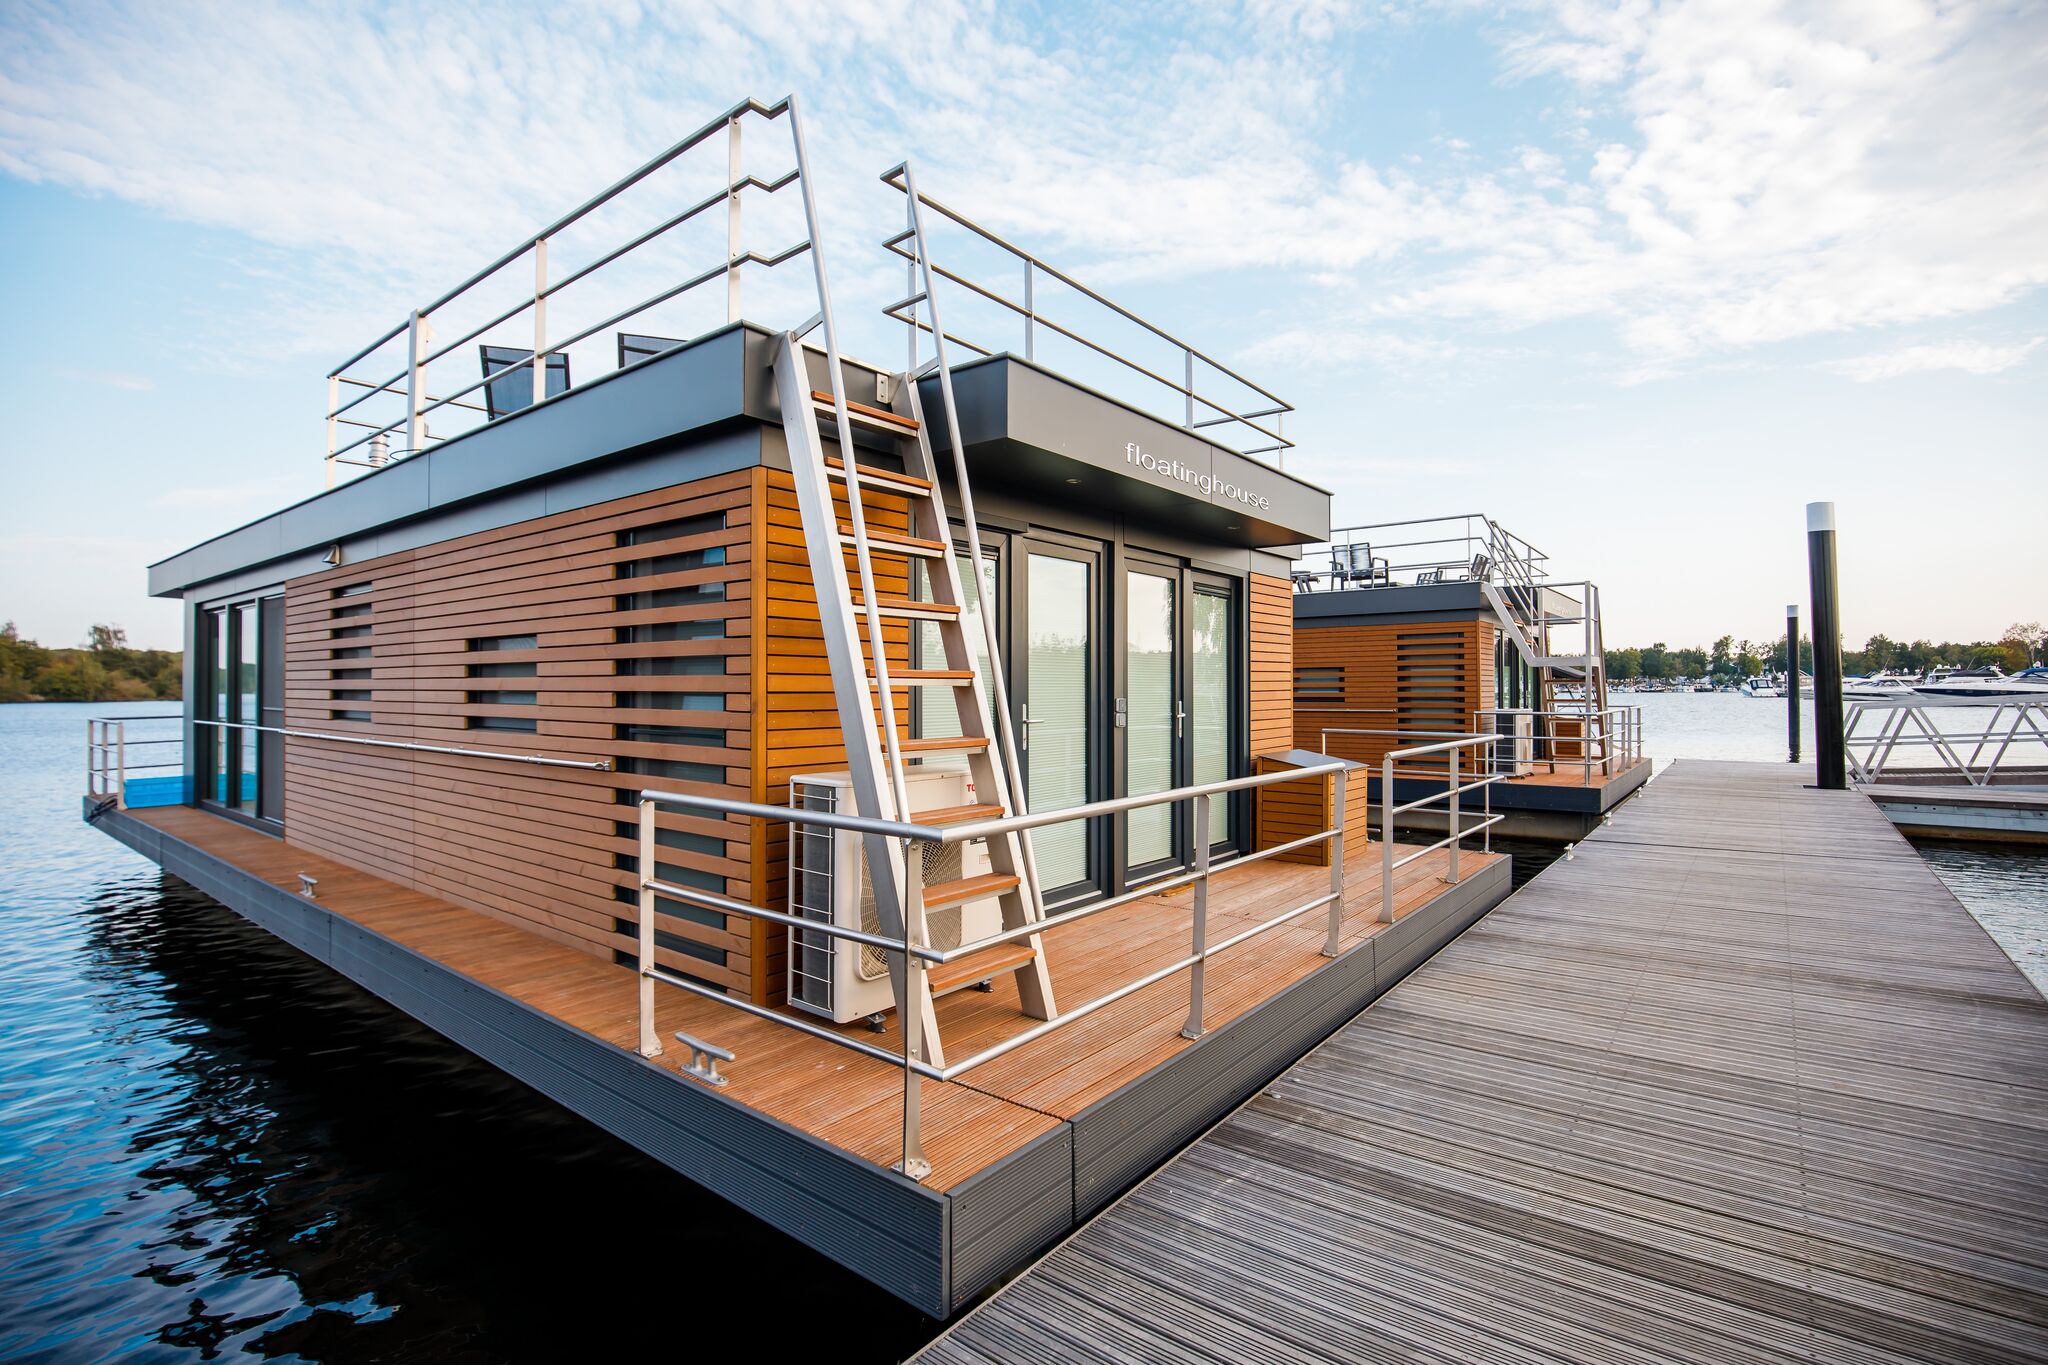 Houseboat with a view over the Leukermeer, on the edge of a holiday park